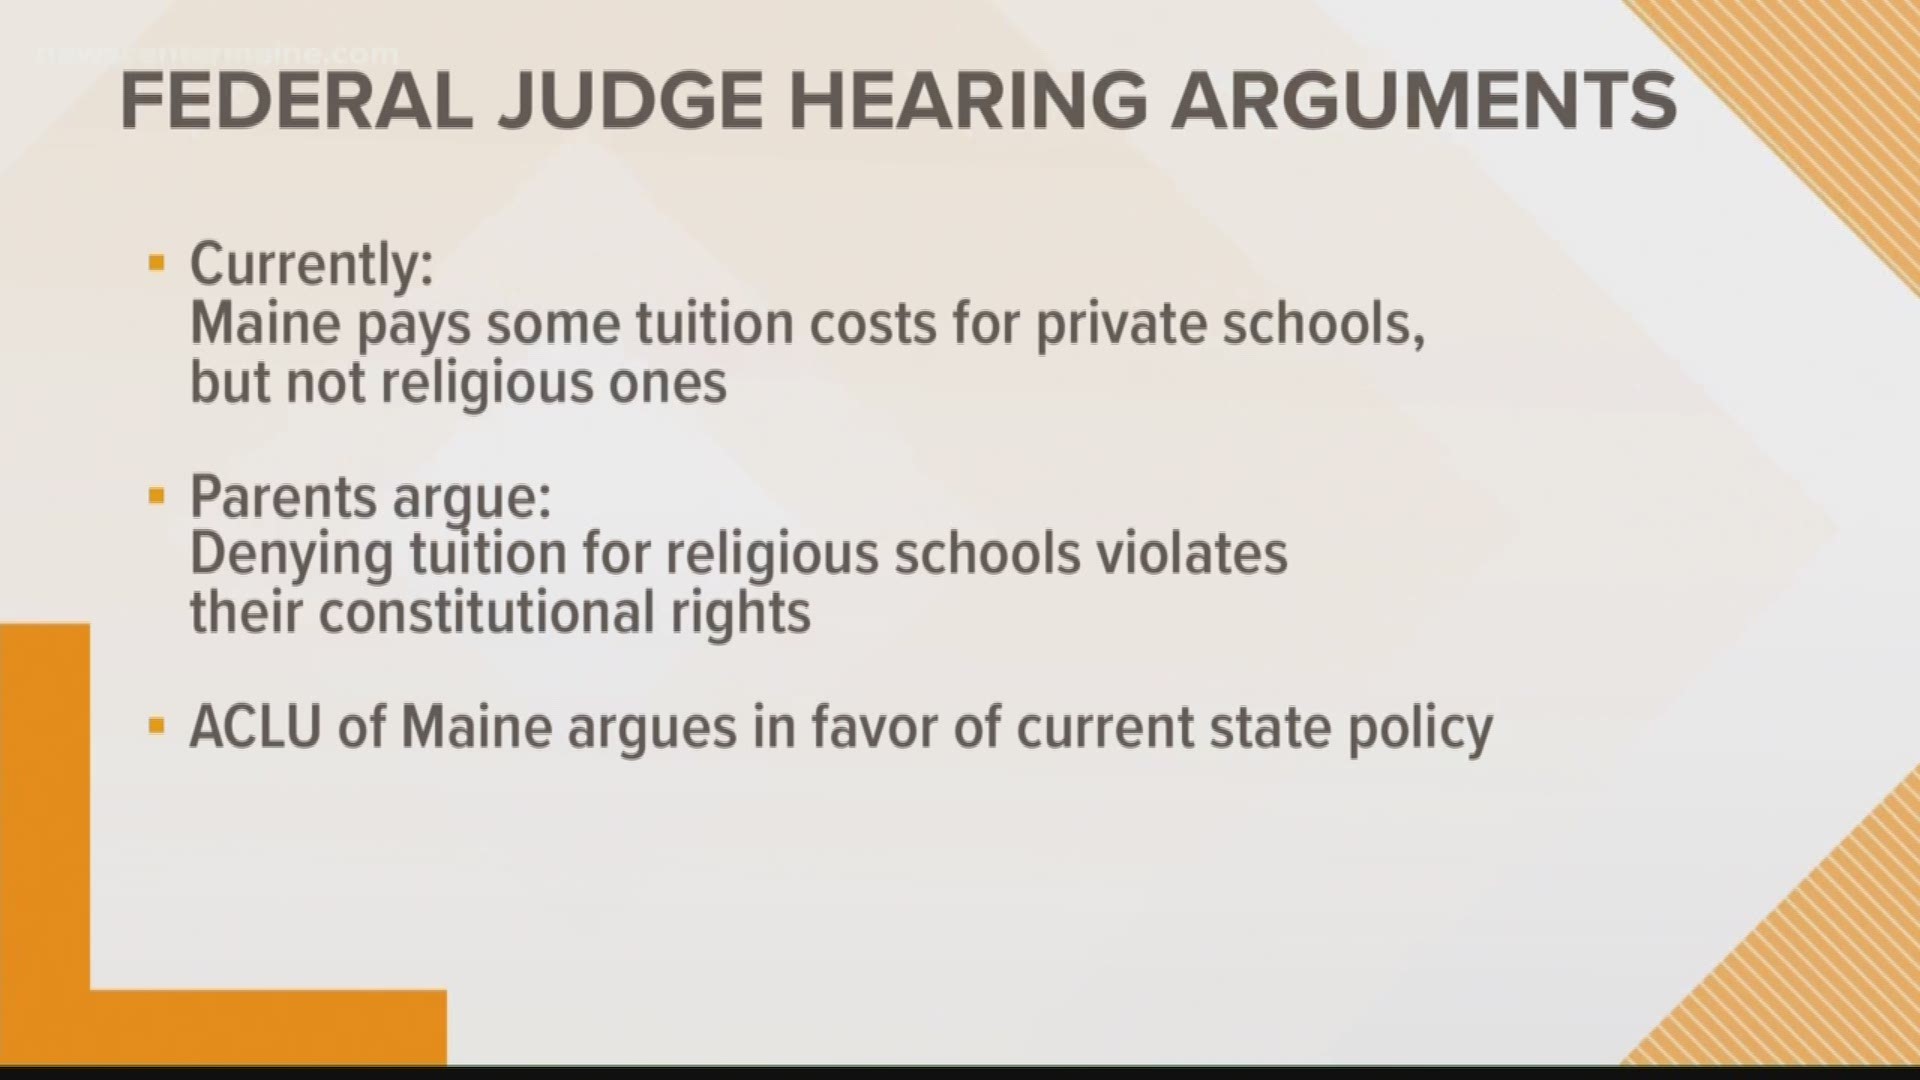 A small group of Maine parents say in Federal Court that the state should pay tuition for some students to attend religious schools.